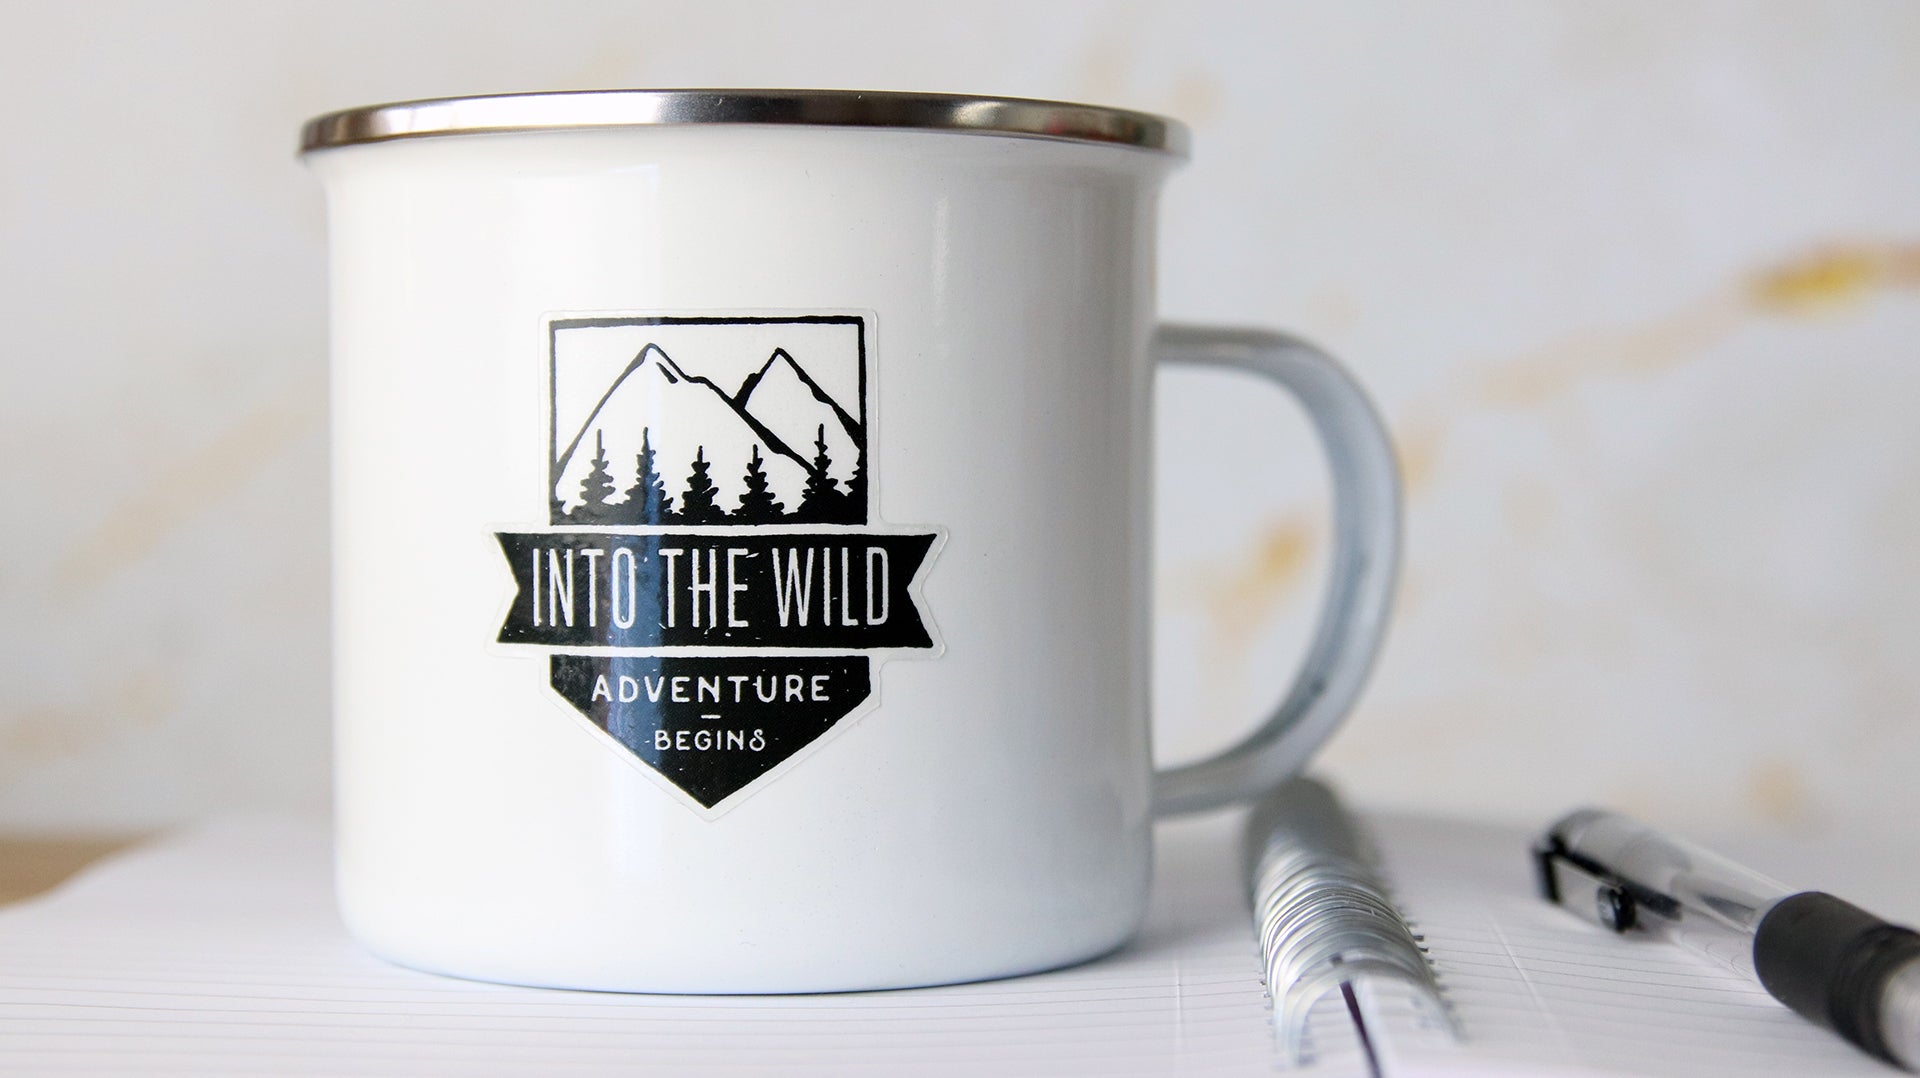 Die cut mug samples with adventure design printed onto clear vinyl applied to a white mug